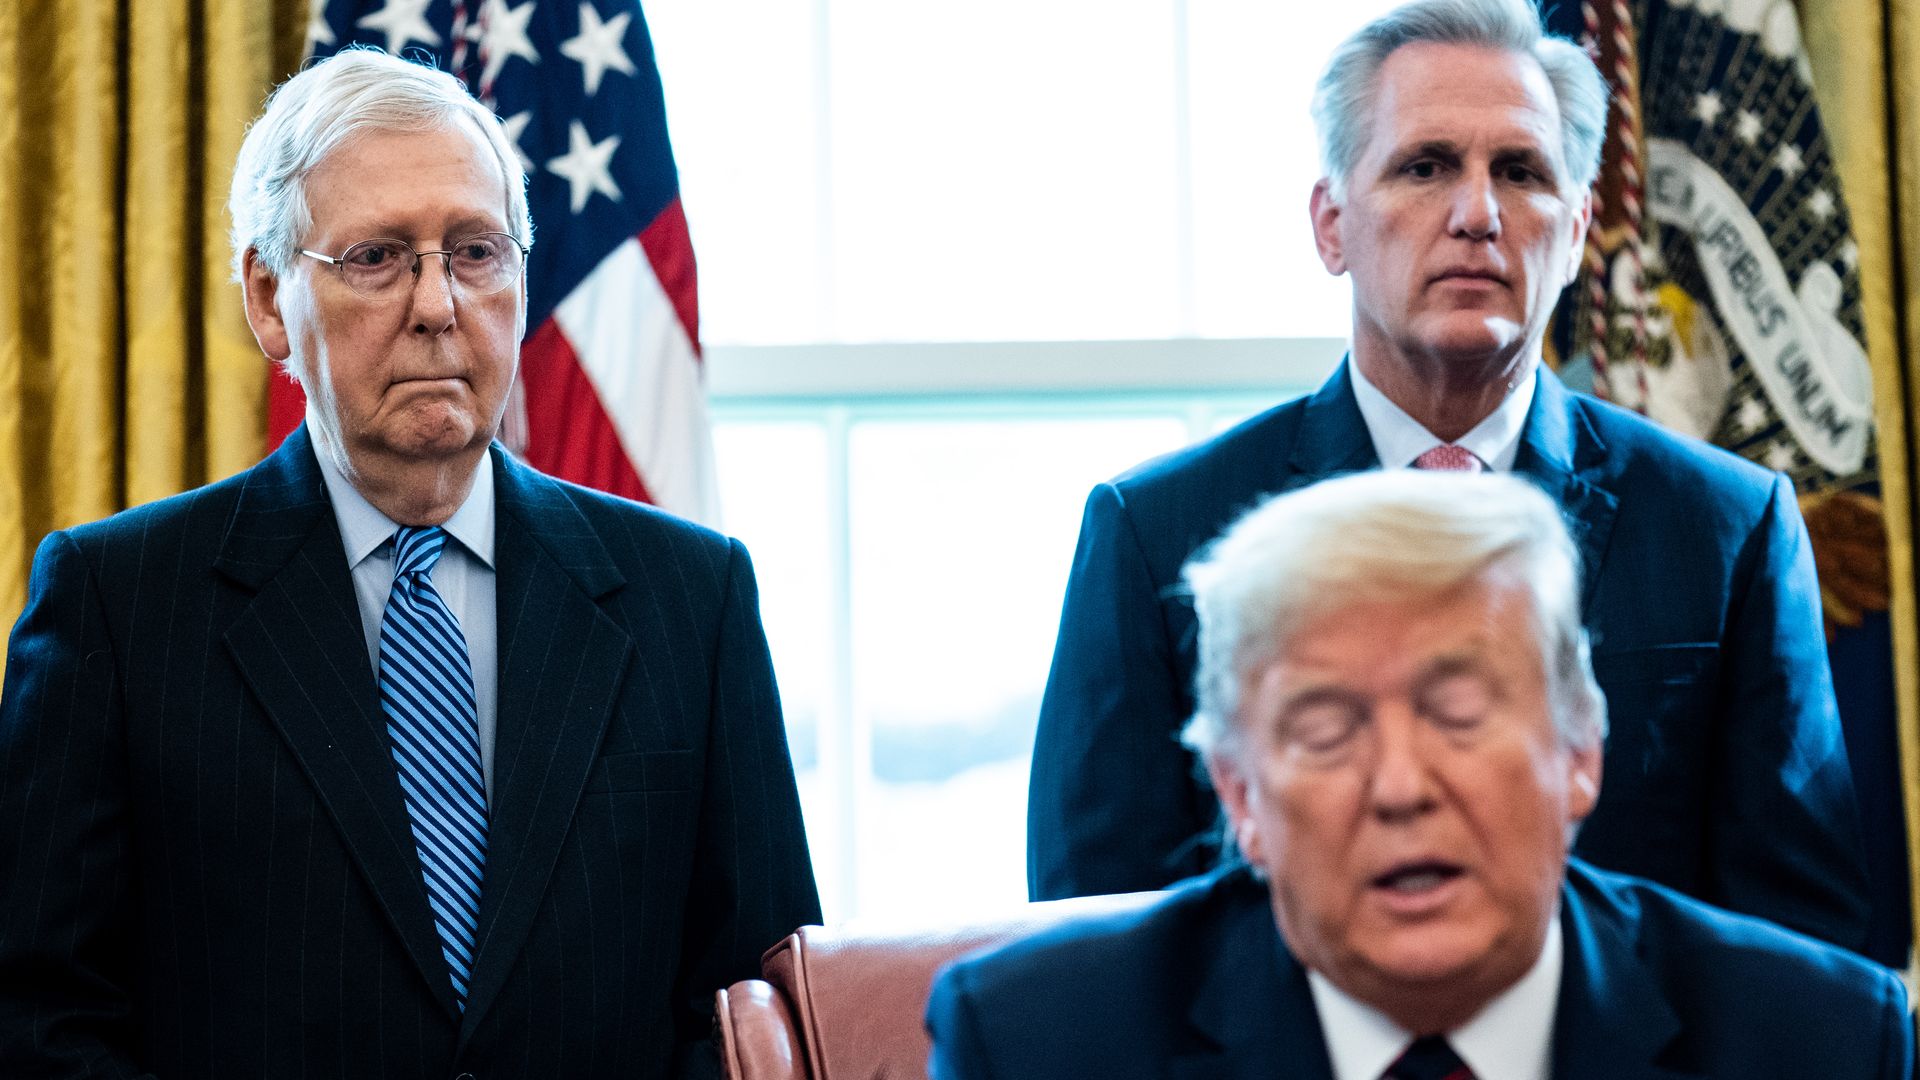 McConnell, McCarthy and Trump